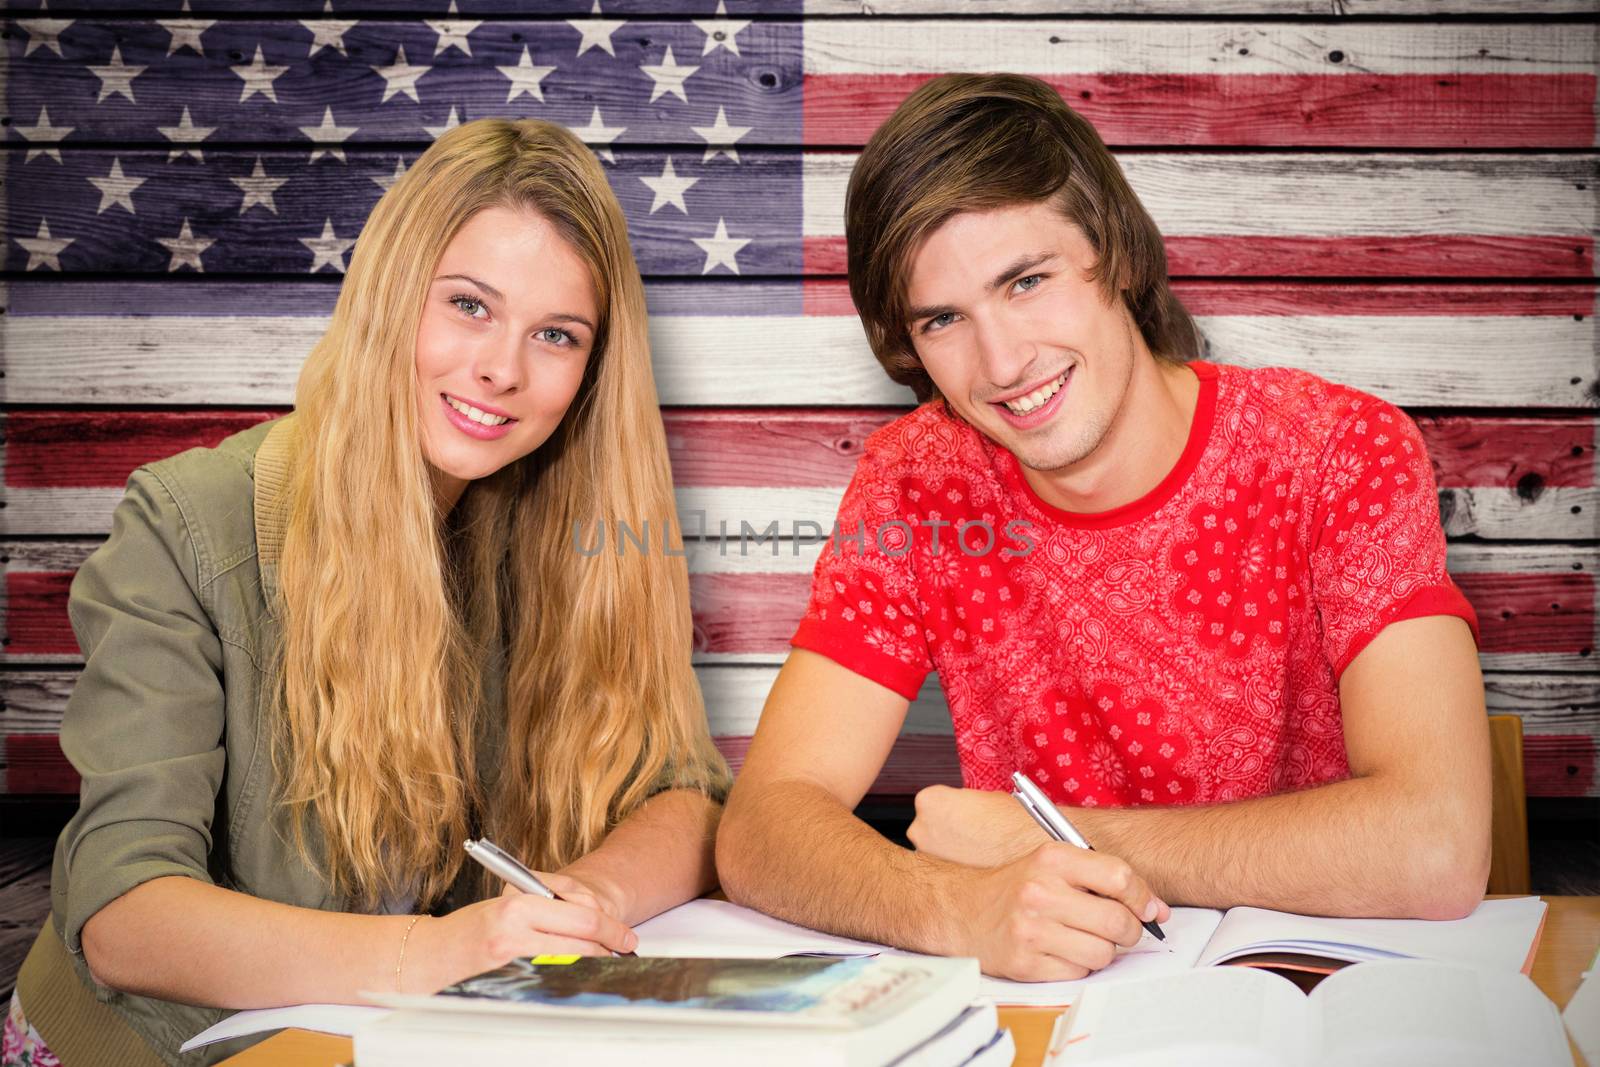 Composite image of students studying by Wavebreakmedia